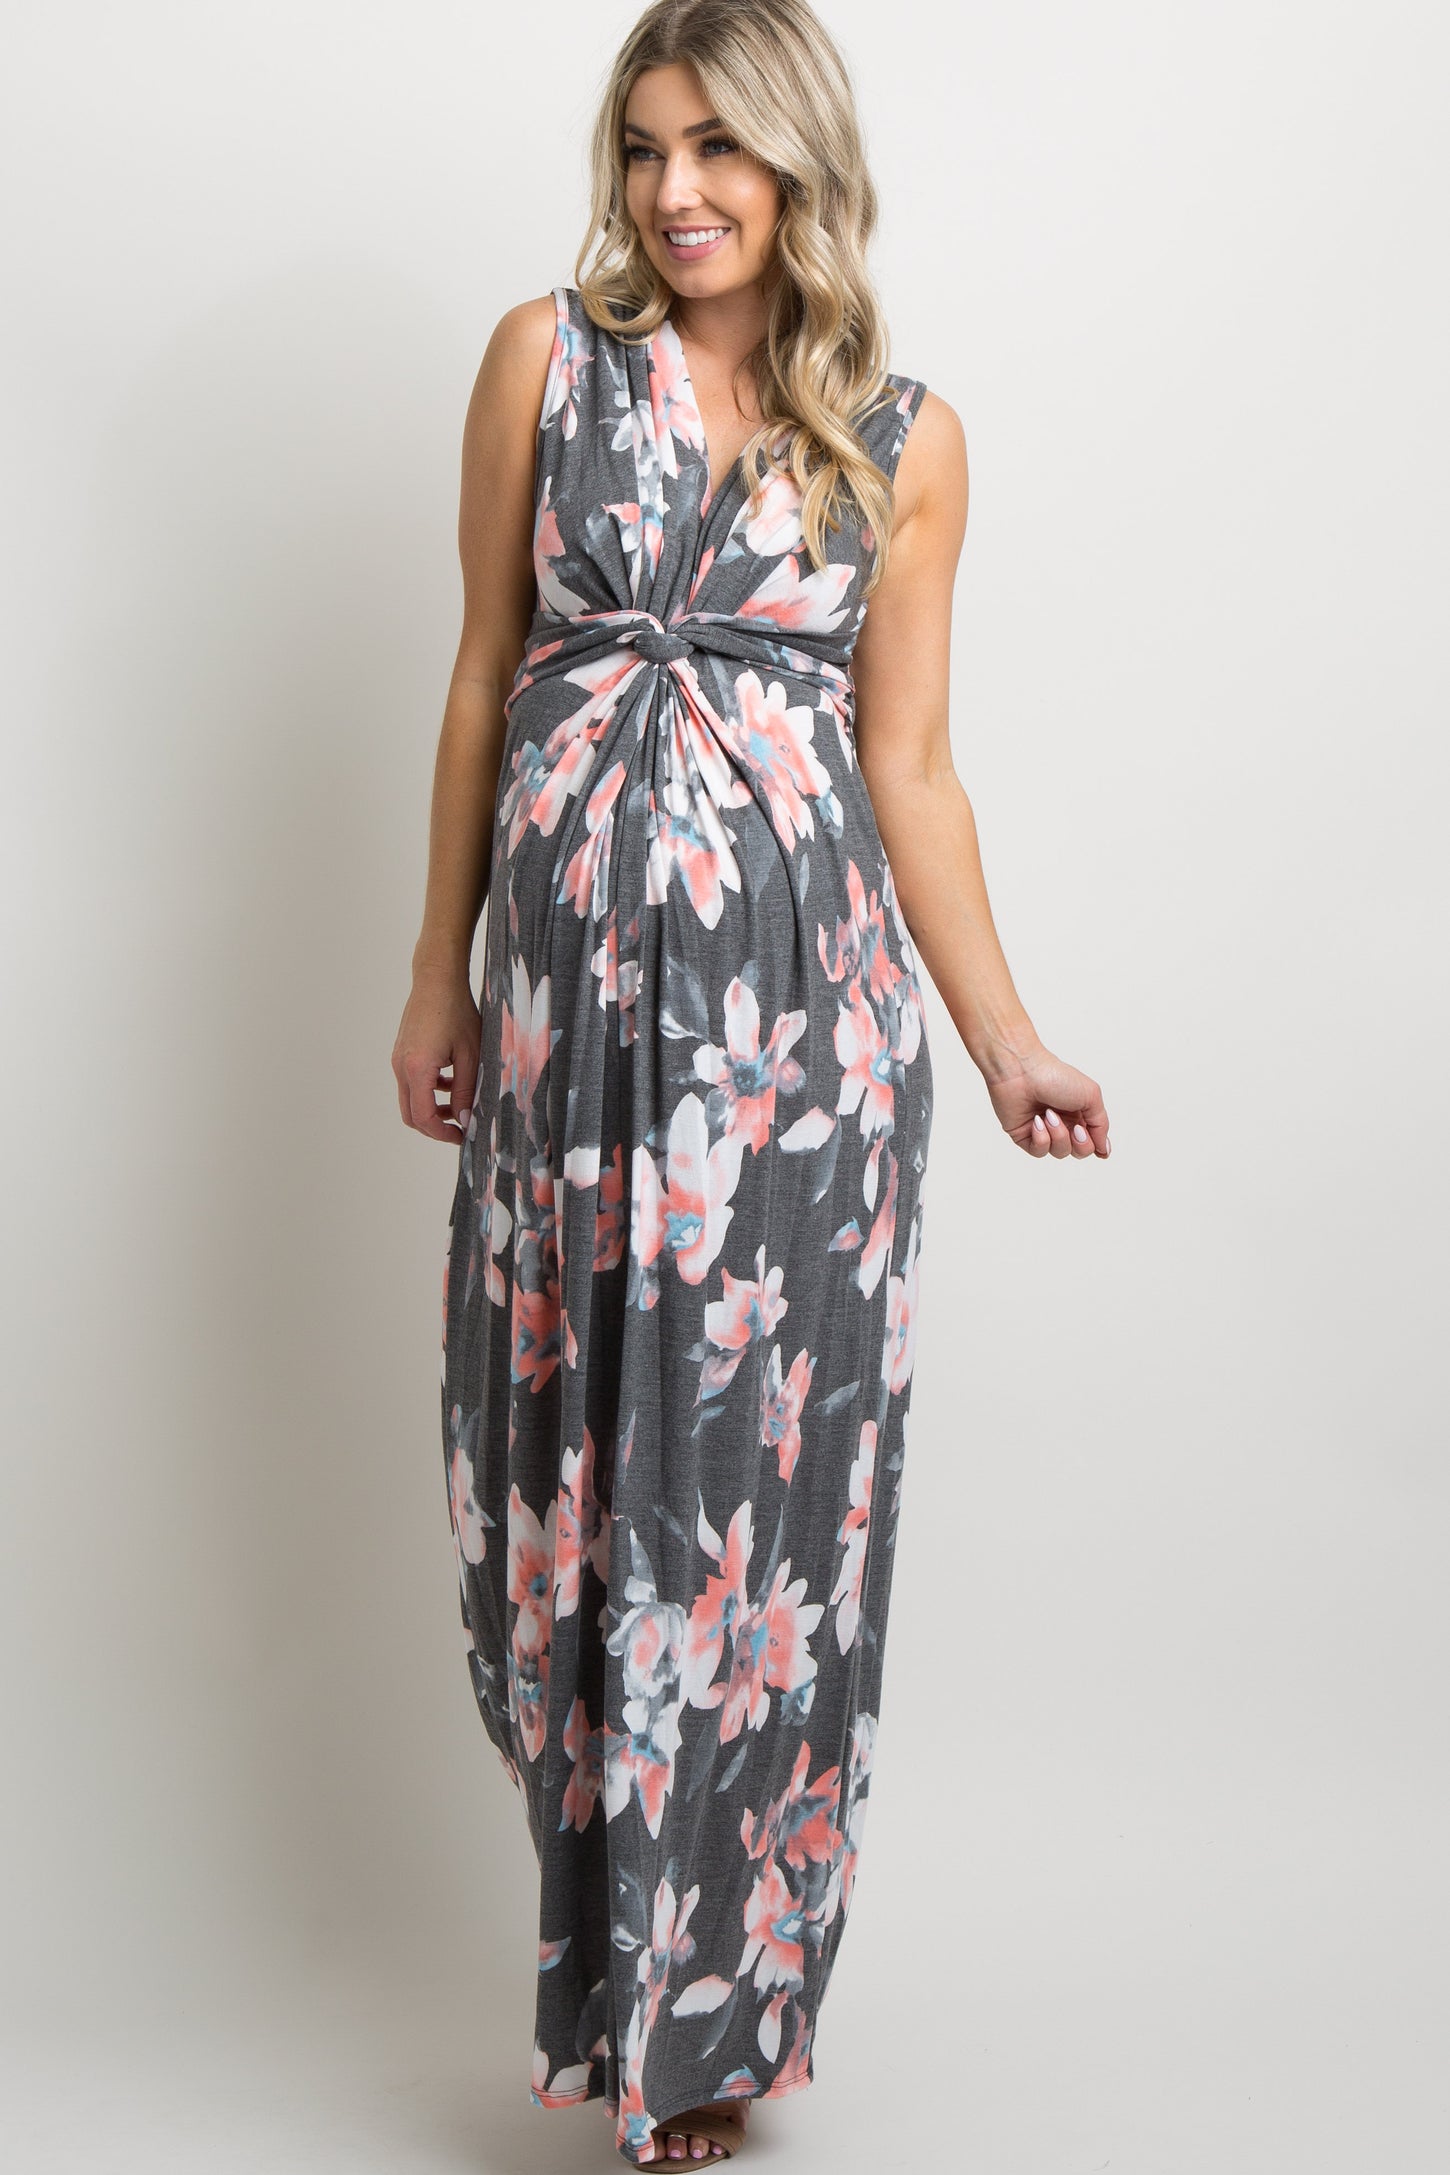 Charcoal Grey Floral Sleeveless Knot Front Maternity Maxi Dress– PinkBlush